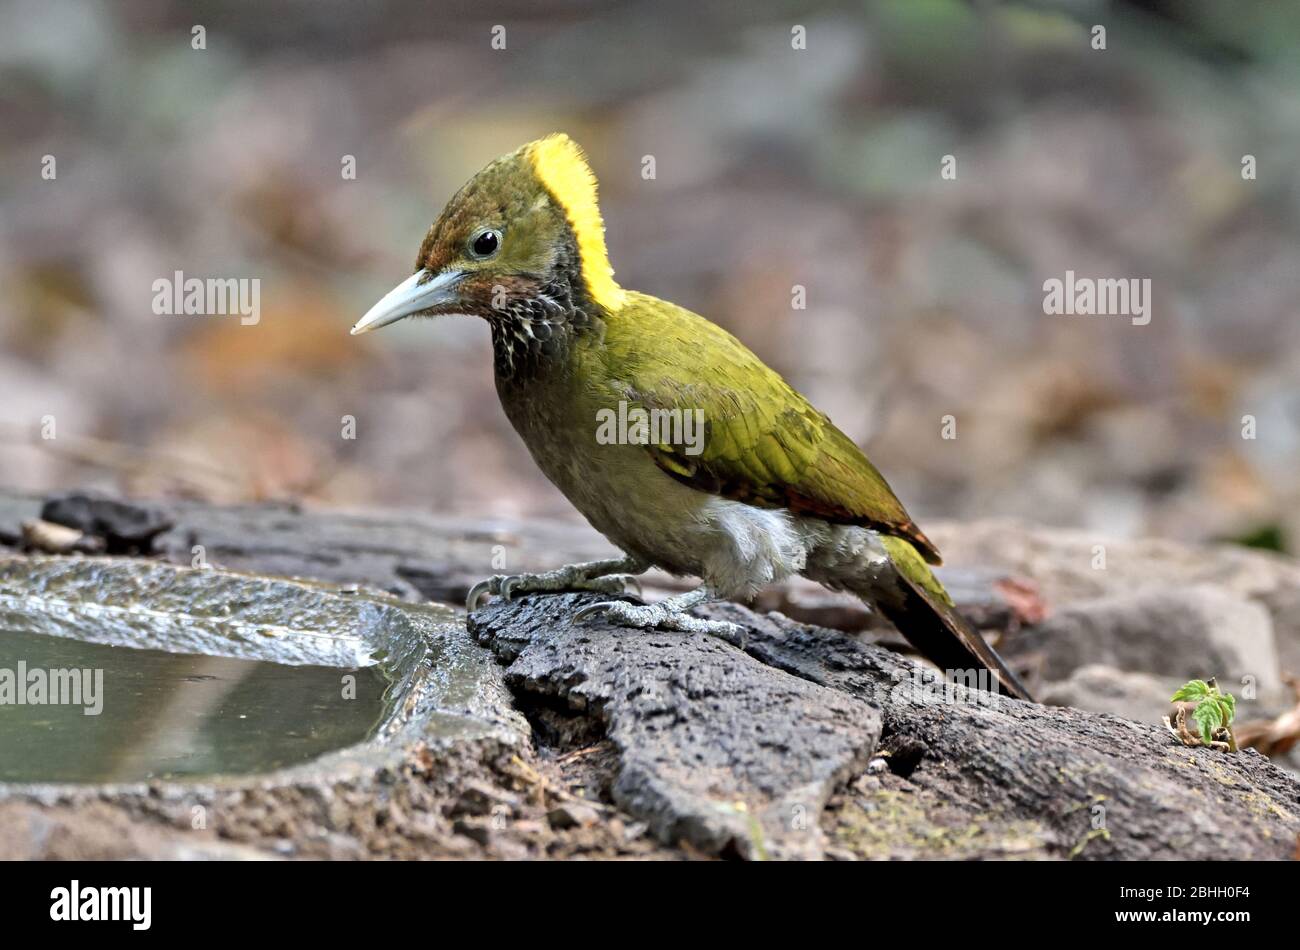 A female Greater Yellownape (Chrysophlegma flavinucha) coming to drink from a small forest pool in Western Thailand Stock Photo